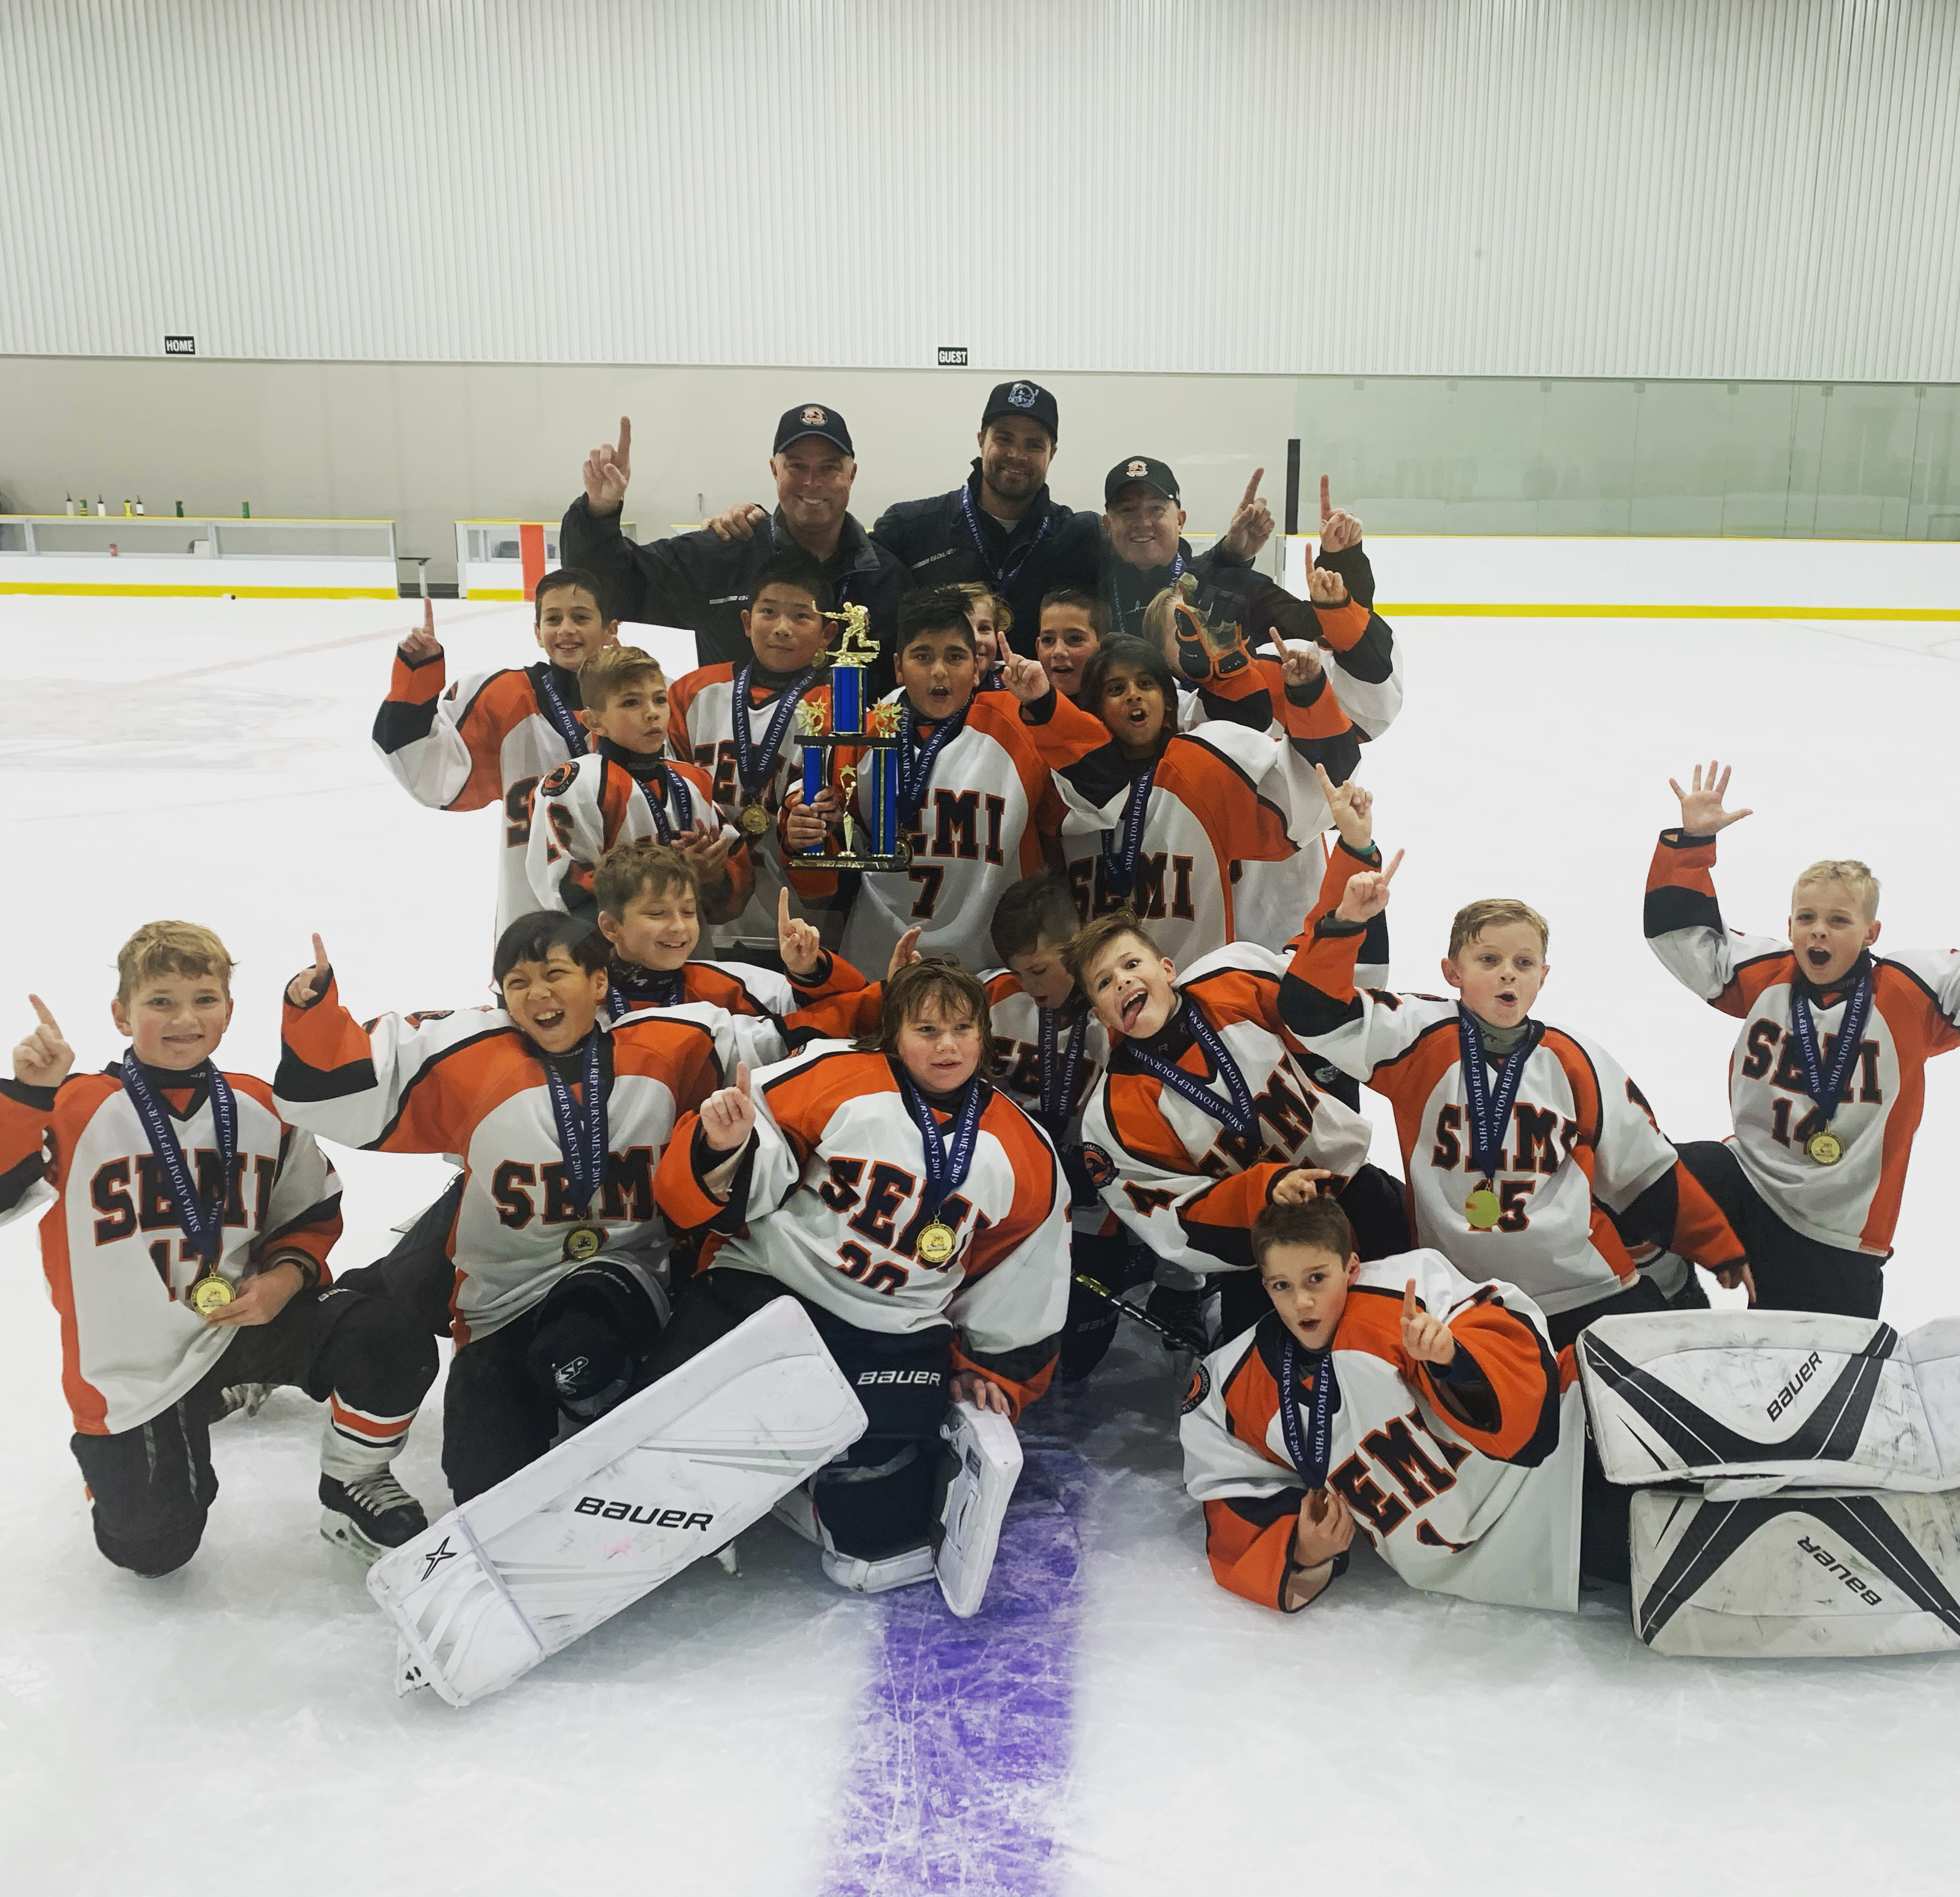 October 14, 2019 ~ Atom A3 wins GOLD at the 2019 Surrey Thanksgiving Tourney after coming back from being down 0-3 after the 1st period to win 5-4! Congrats team!